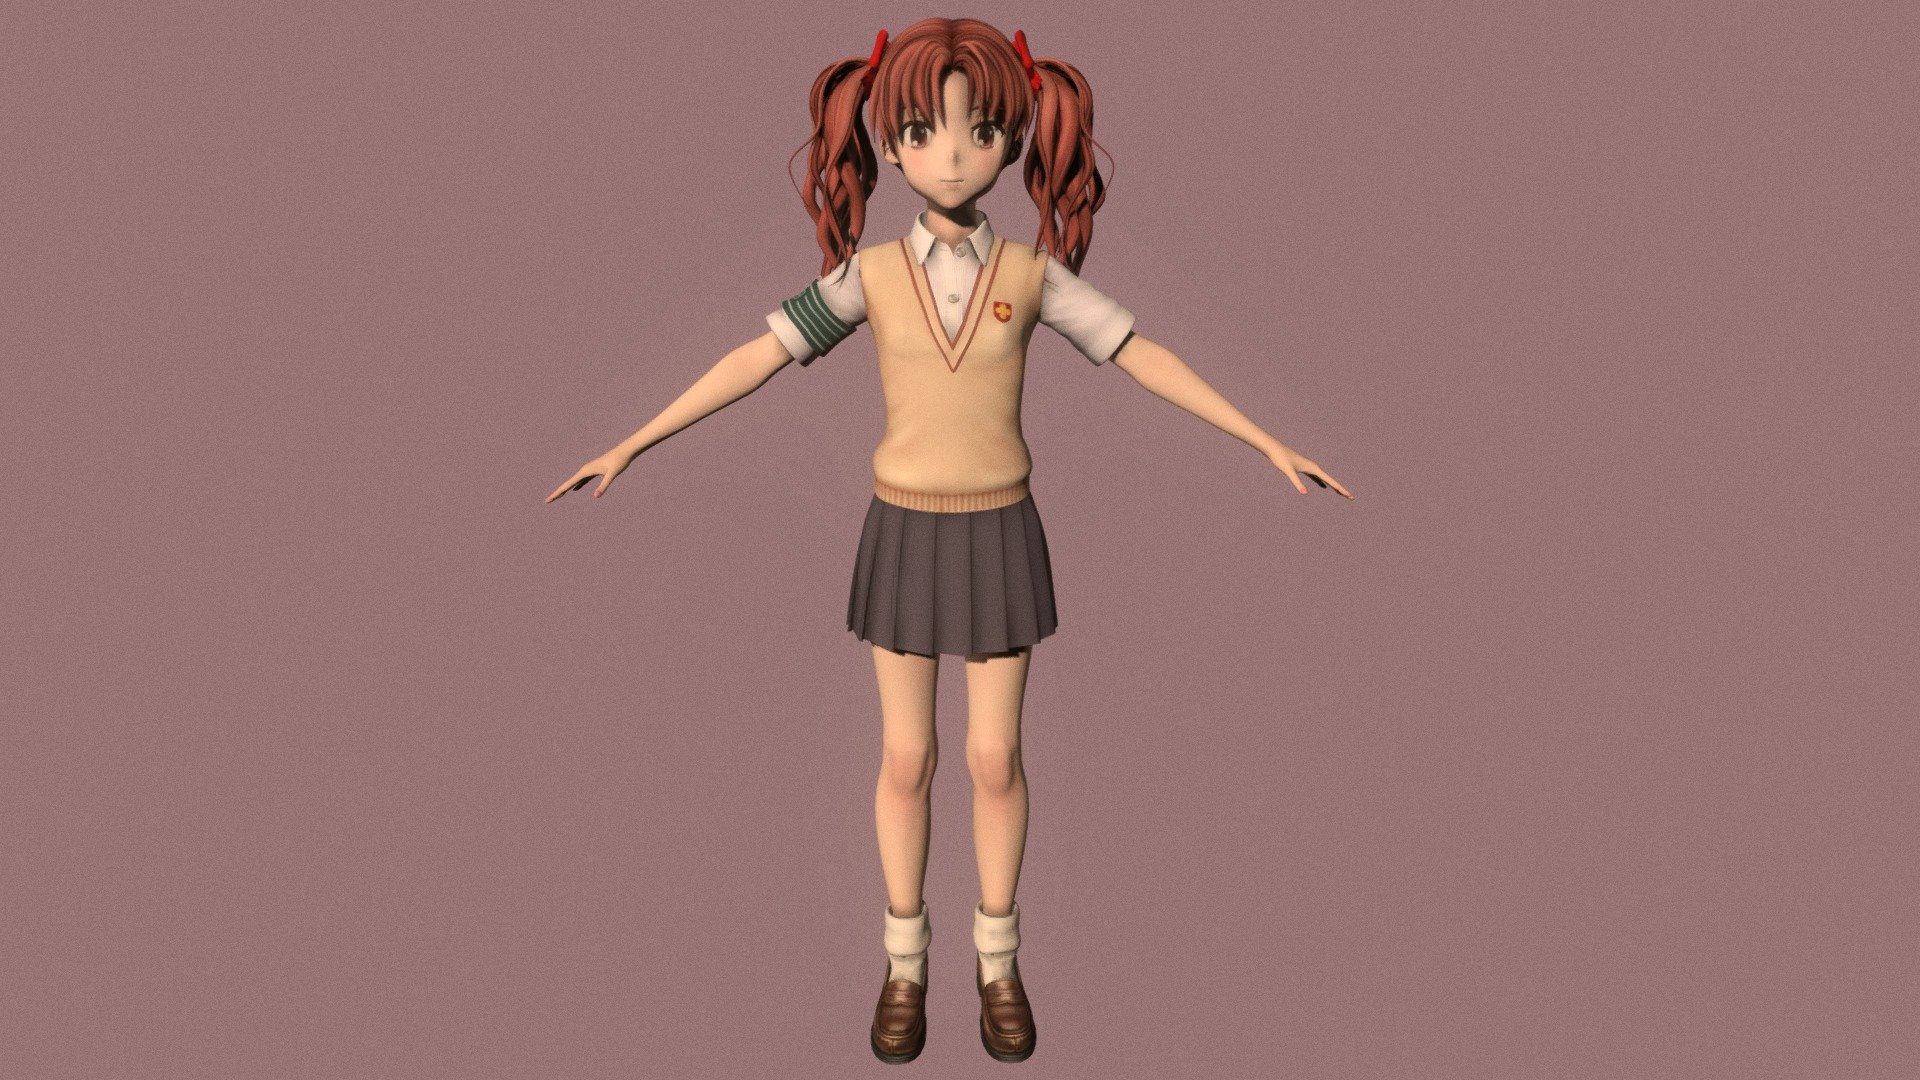 T-pose rigged model of anime girl Kuroko Shirai (A Certain Scientific Railgun).

Body and clothings are rigged and skinned by 3ds Max CAT system.

Eye direction and facial animation controlled by Morpher modifier / Shape Keys / Blendshape.

This product include .FBX (ver. 7200) and .MAX (ver. 2010) files.

3ds Max version is turbosmoothed to give a high quality render (as you can see here).

Original main body mesh have ~7.000 polys.

This 3D model may need some tweaking to adapt the rig system to games engine and other platforms.

I support convert model to various file formats (the rig data will be lost in this process): 3DS; AI; ASE; DAE; DWF; DWG; DXF; FLT; HTR; IGS; M3G; MQO; OBJ; SAT; STL; W3D; WRL; X.

You can buy all of my models in one pack to save cost: https://sketchfab.com/3d-models/all-of-my-anime-girls-c5a56156994e4193b9e8fa21a3b8360b

And I can make commission models.

If you have any questions, please leave a comment or contact me via my email 3d.eden.project@gmail.com 3d model